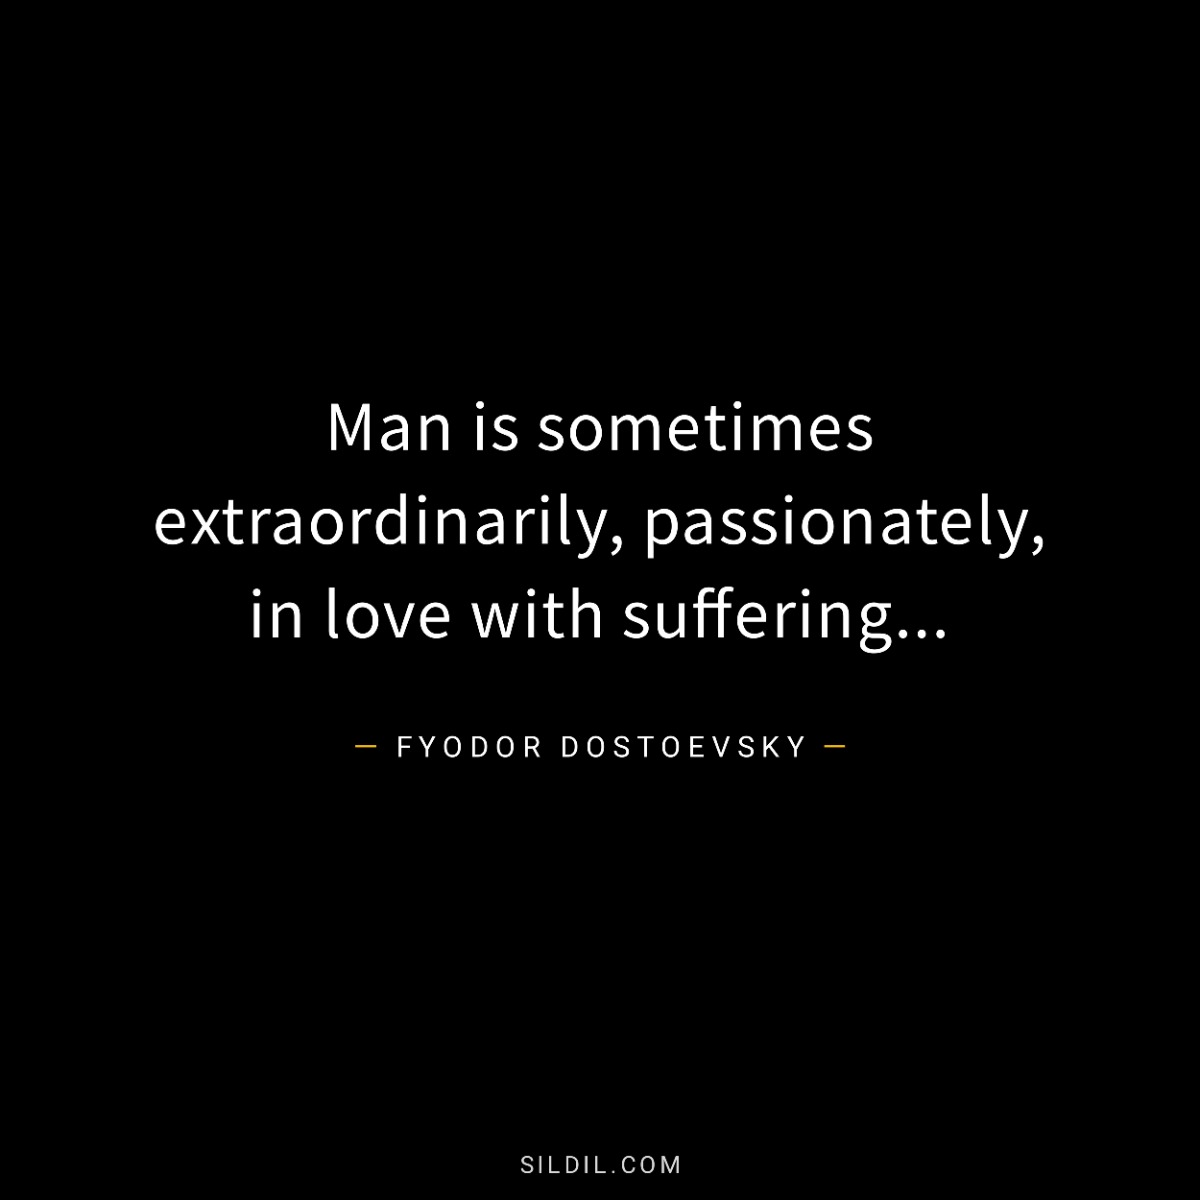 Man is sometimes extraordinarily, passionately, in love with suffering...